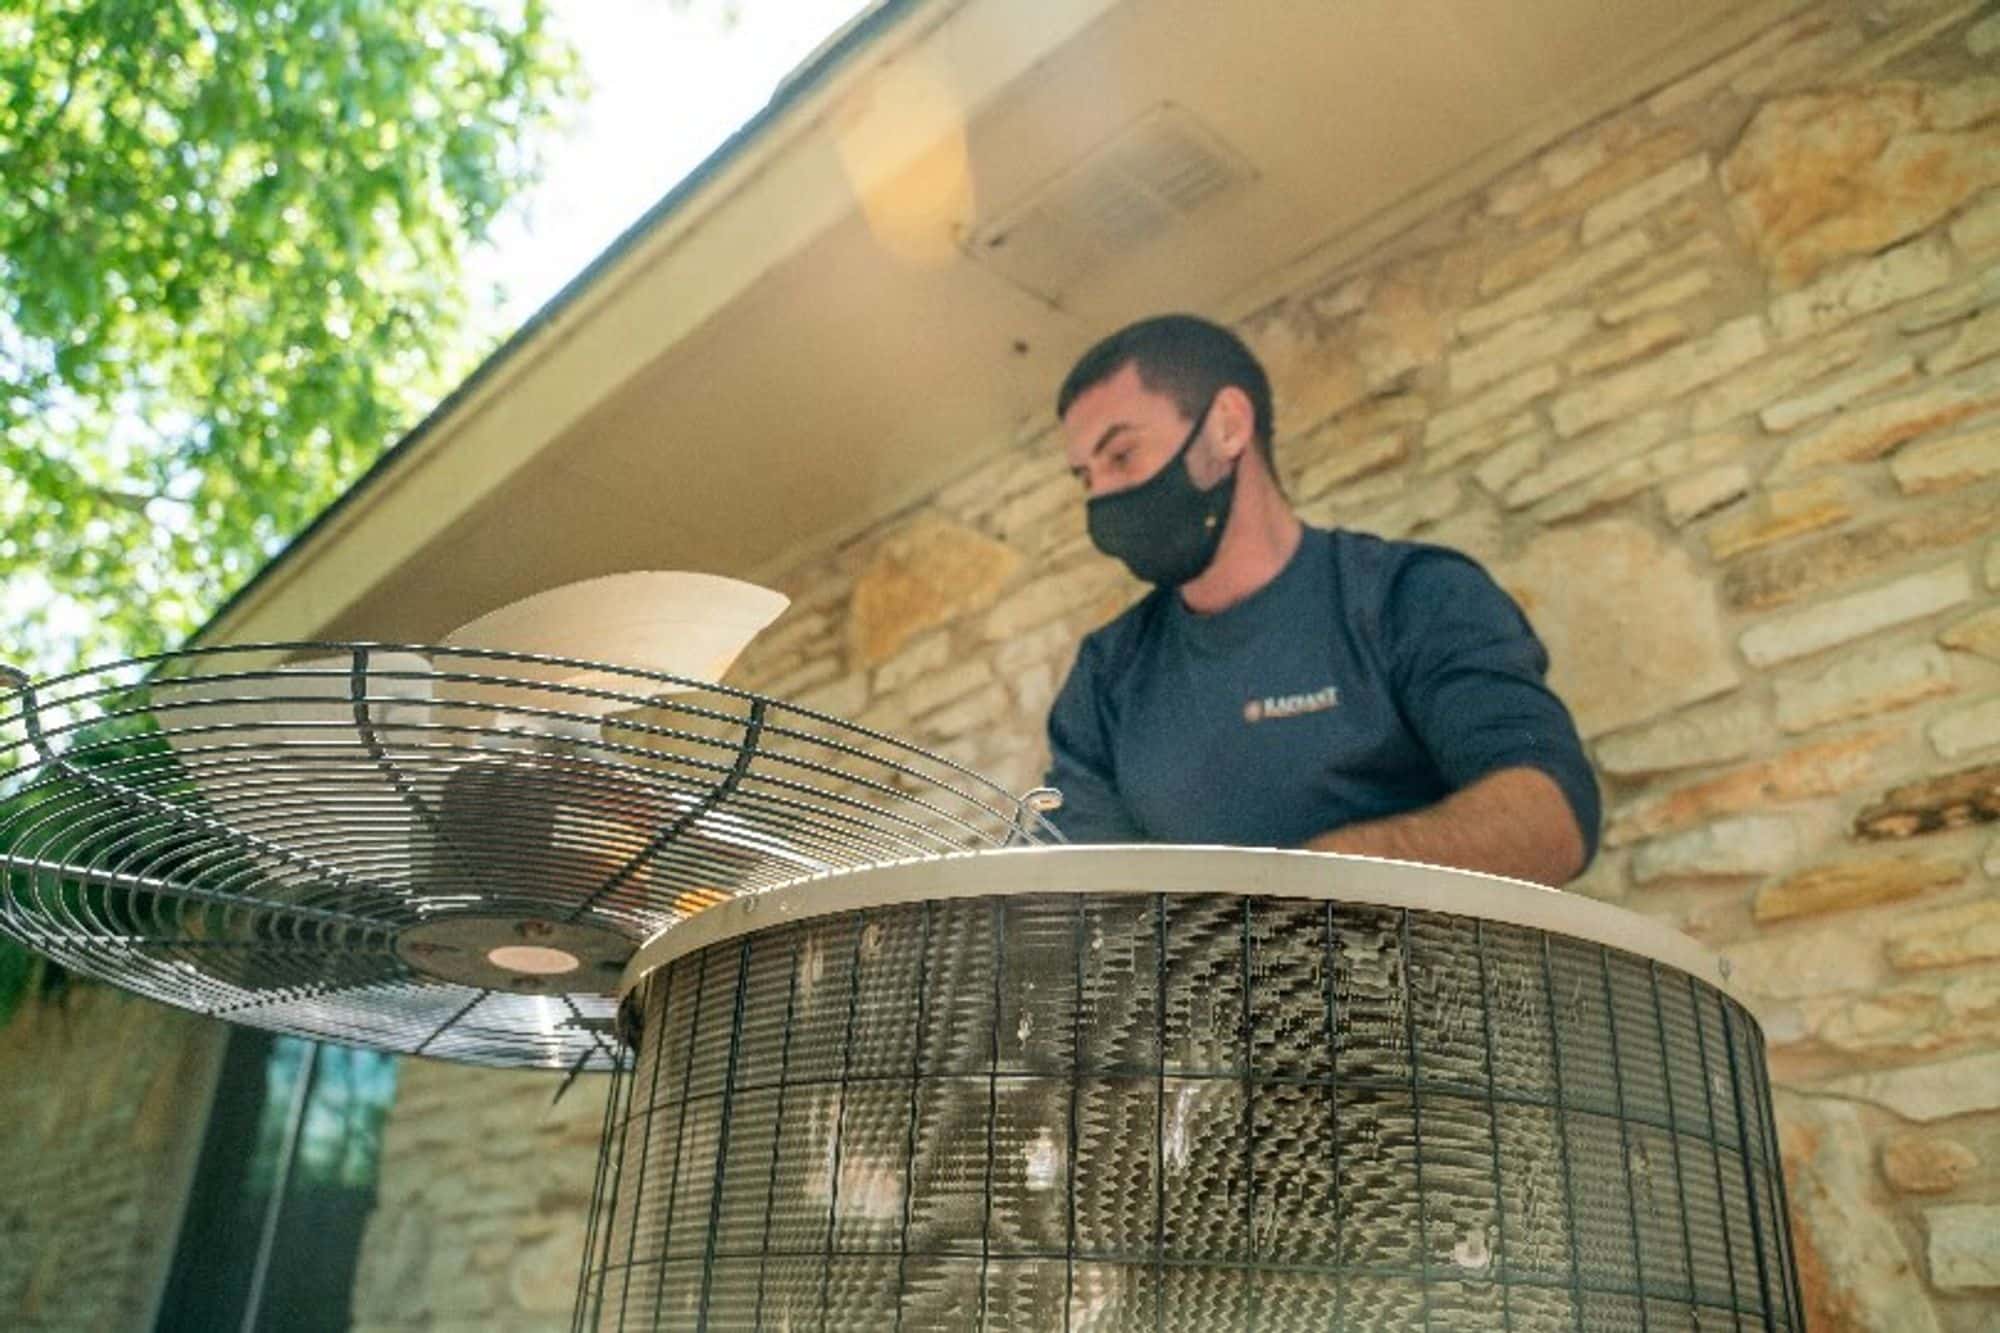 Radiant technician works on fixing an air conditioner at a home in Texas